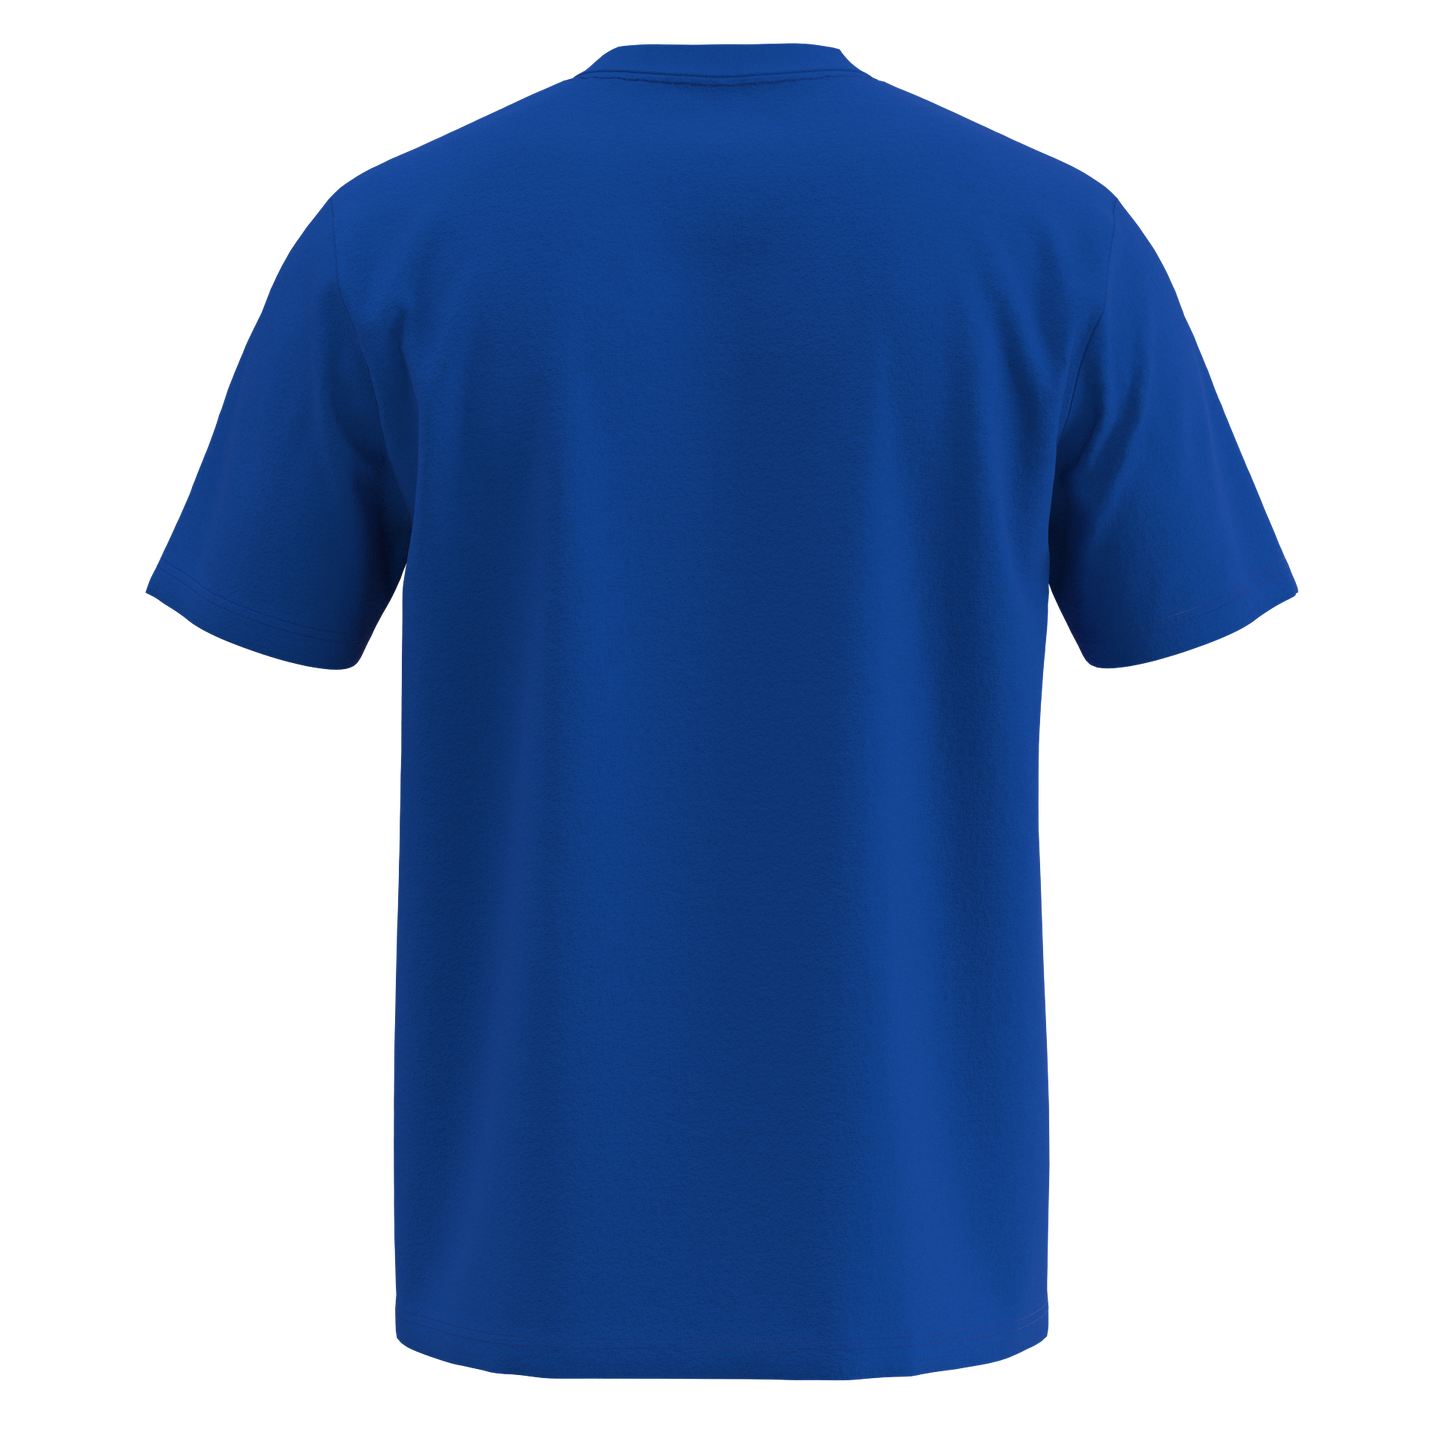 Blues Youth Cotton Tee